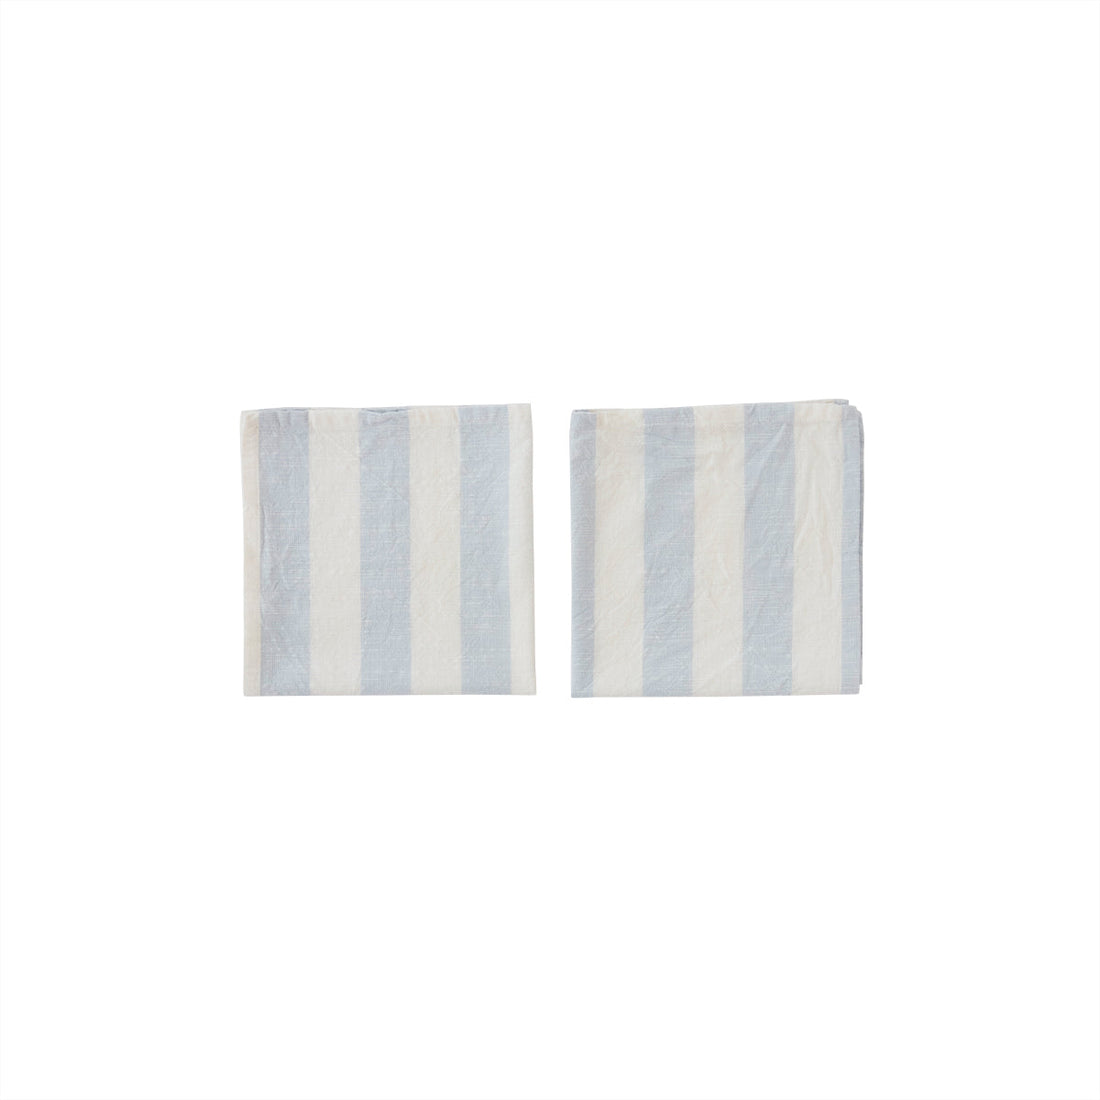 Oyoy Living Striped Fabric Wipe - Pack of 2 - Ice Blue